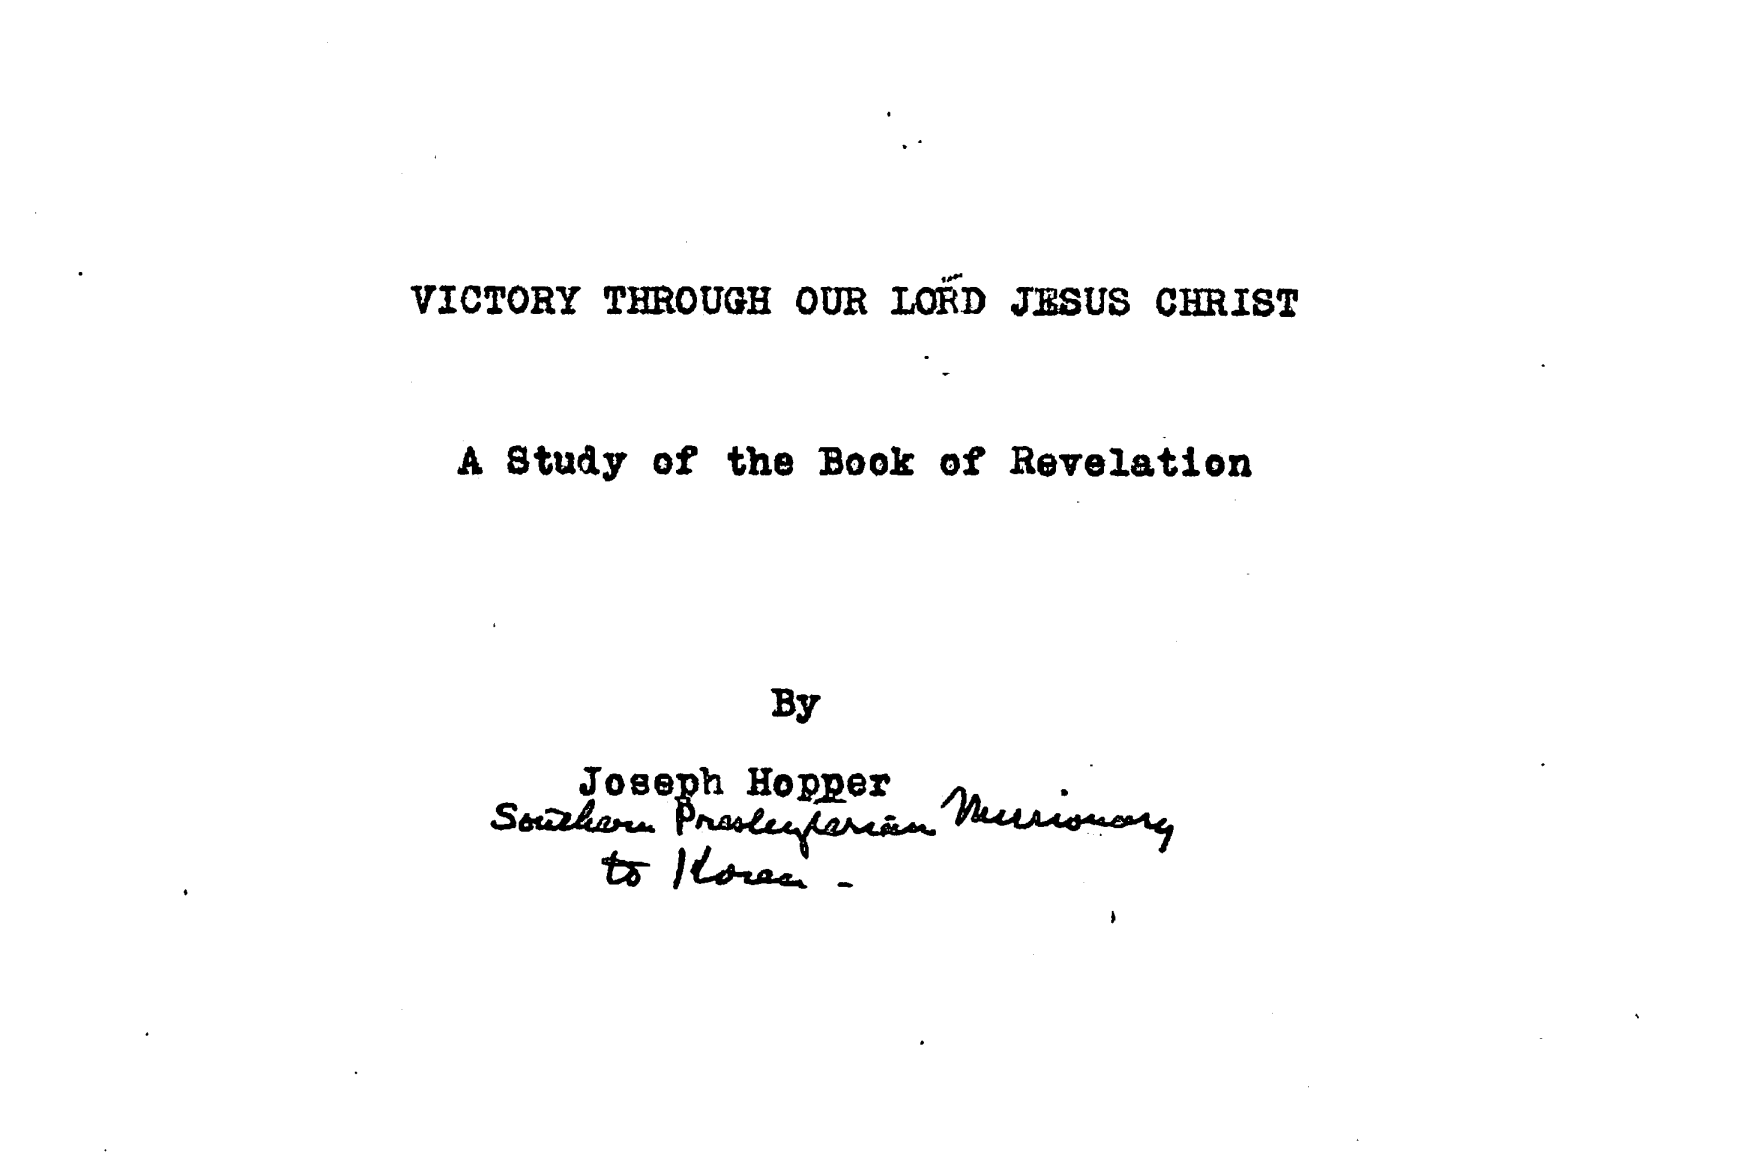 Title page of Hopper’s study of Revelation